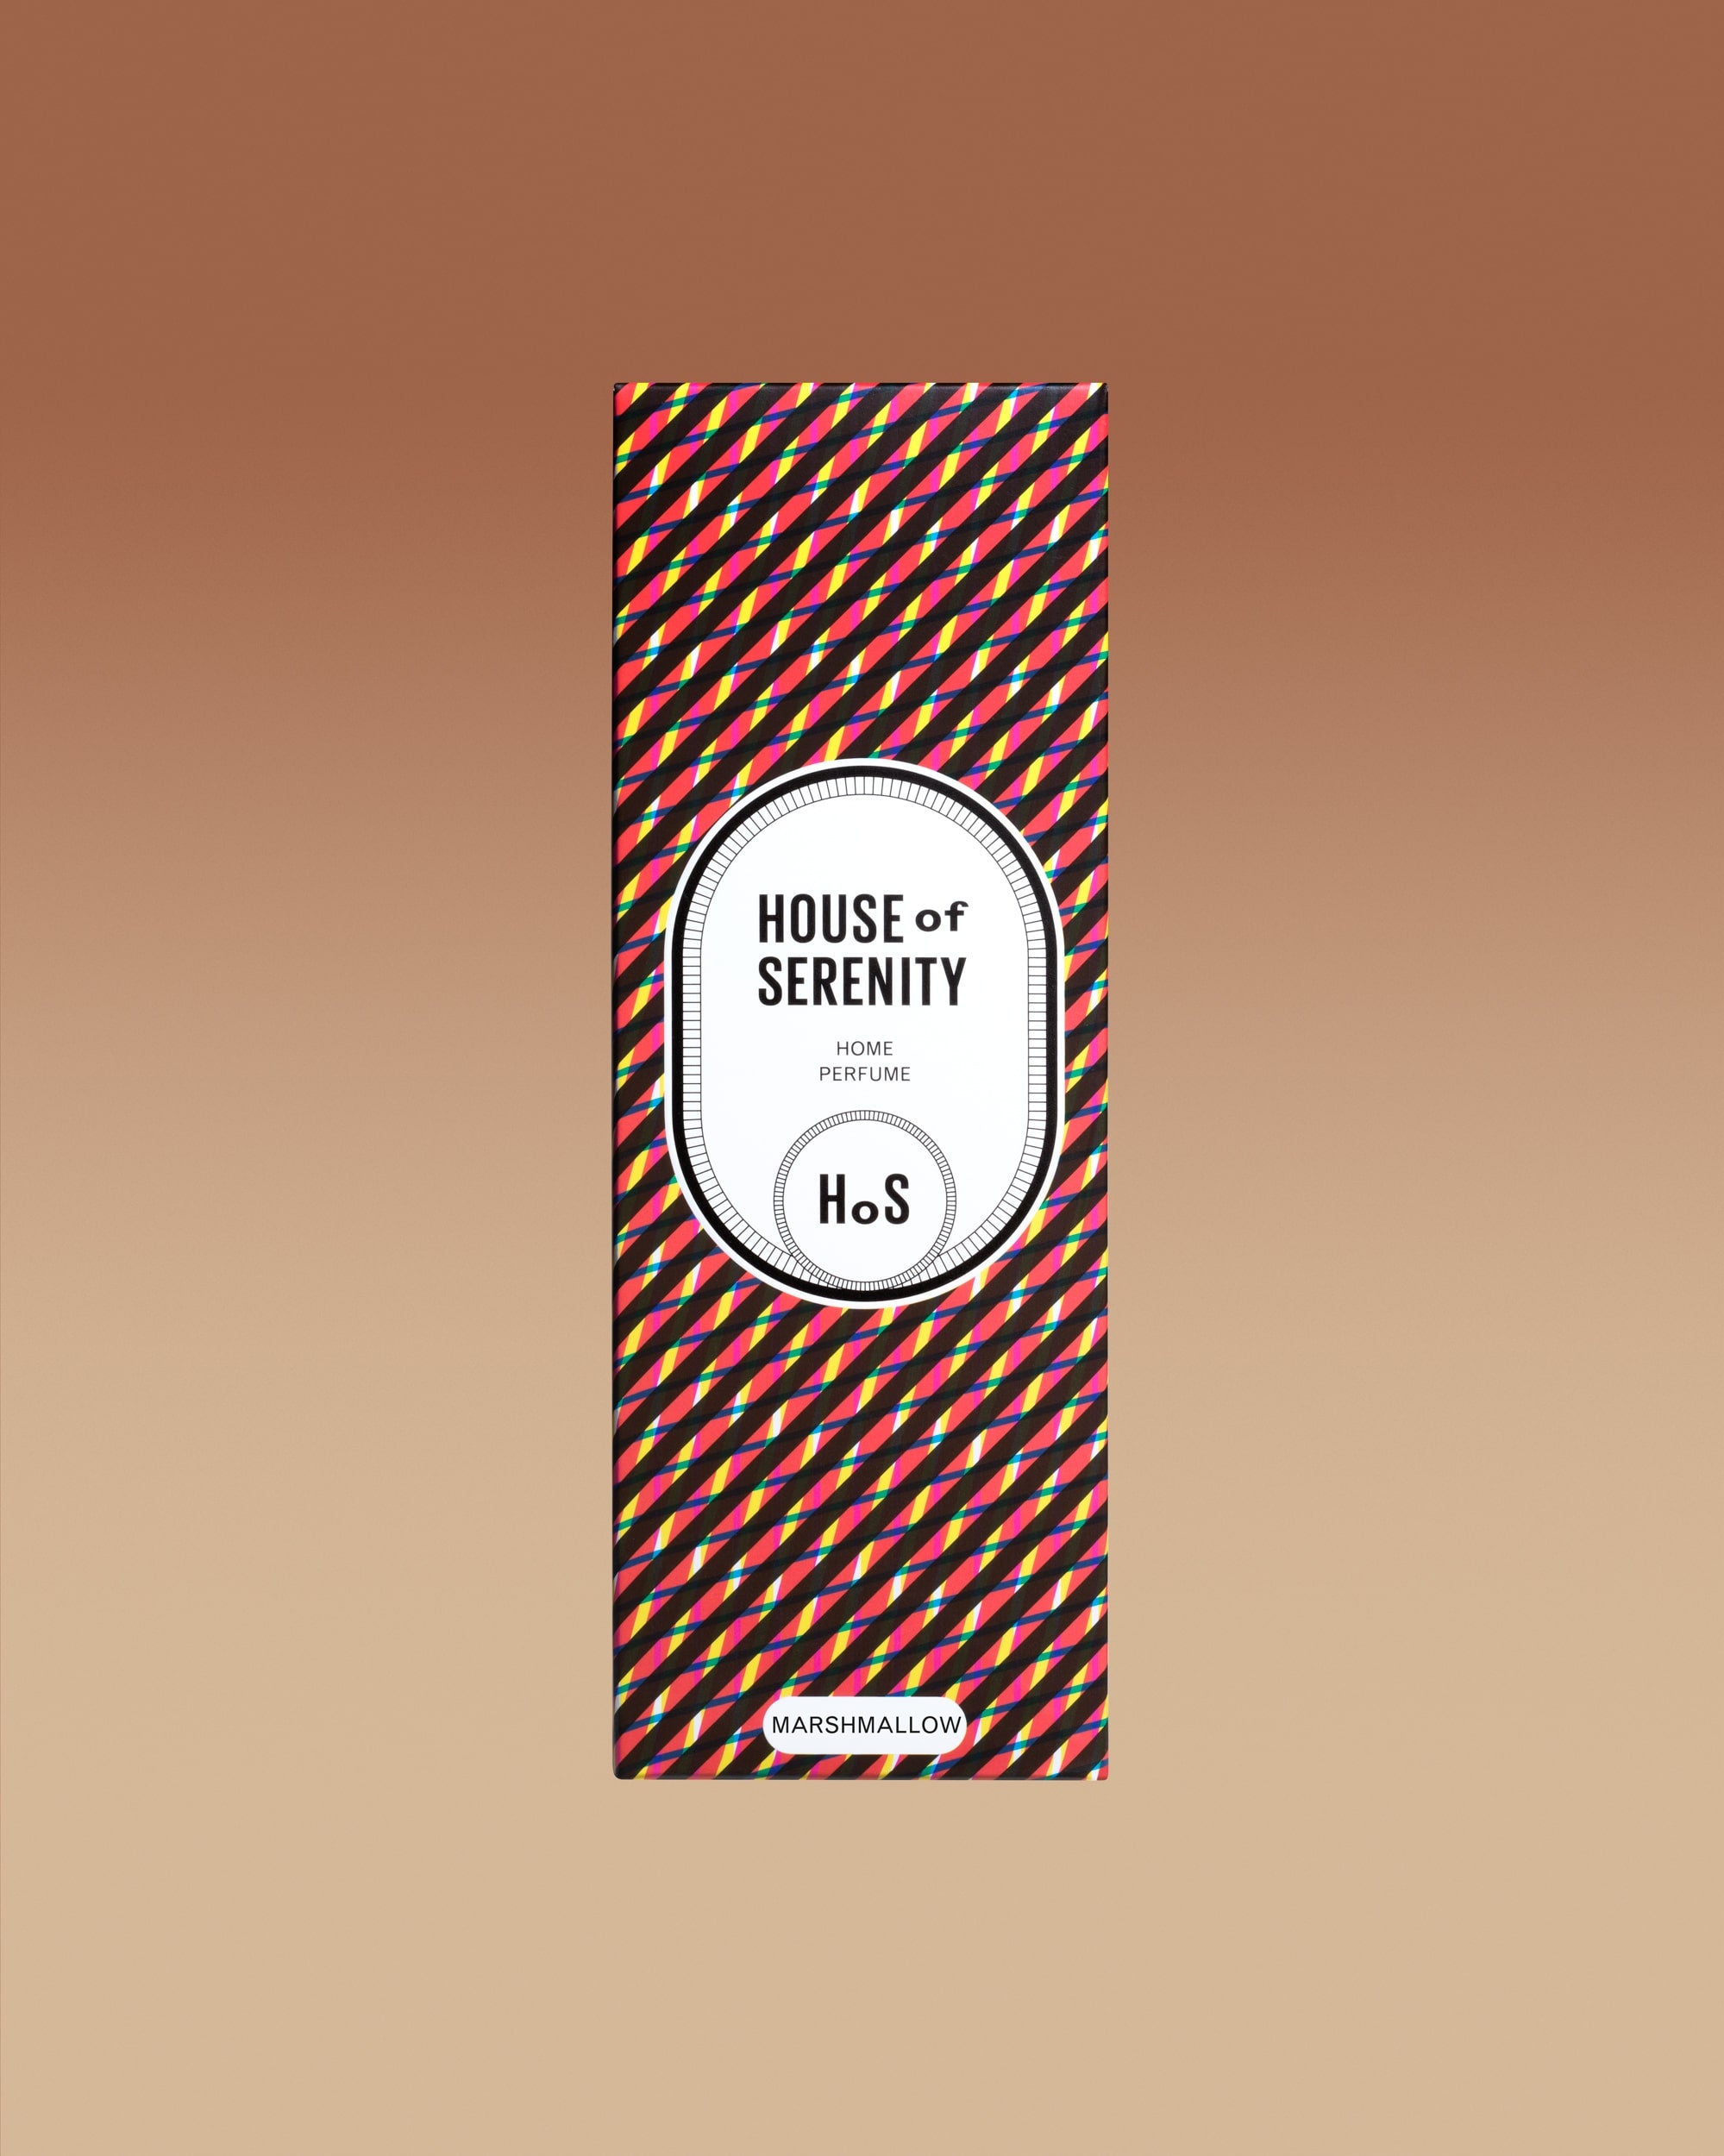 Parfum d'intérieur Room Spray The house of serenity Marshmallow Sweet Collection 2